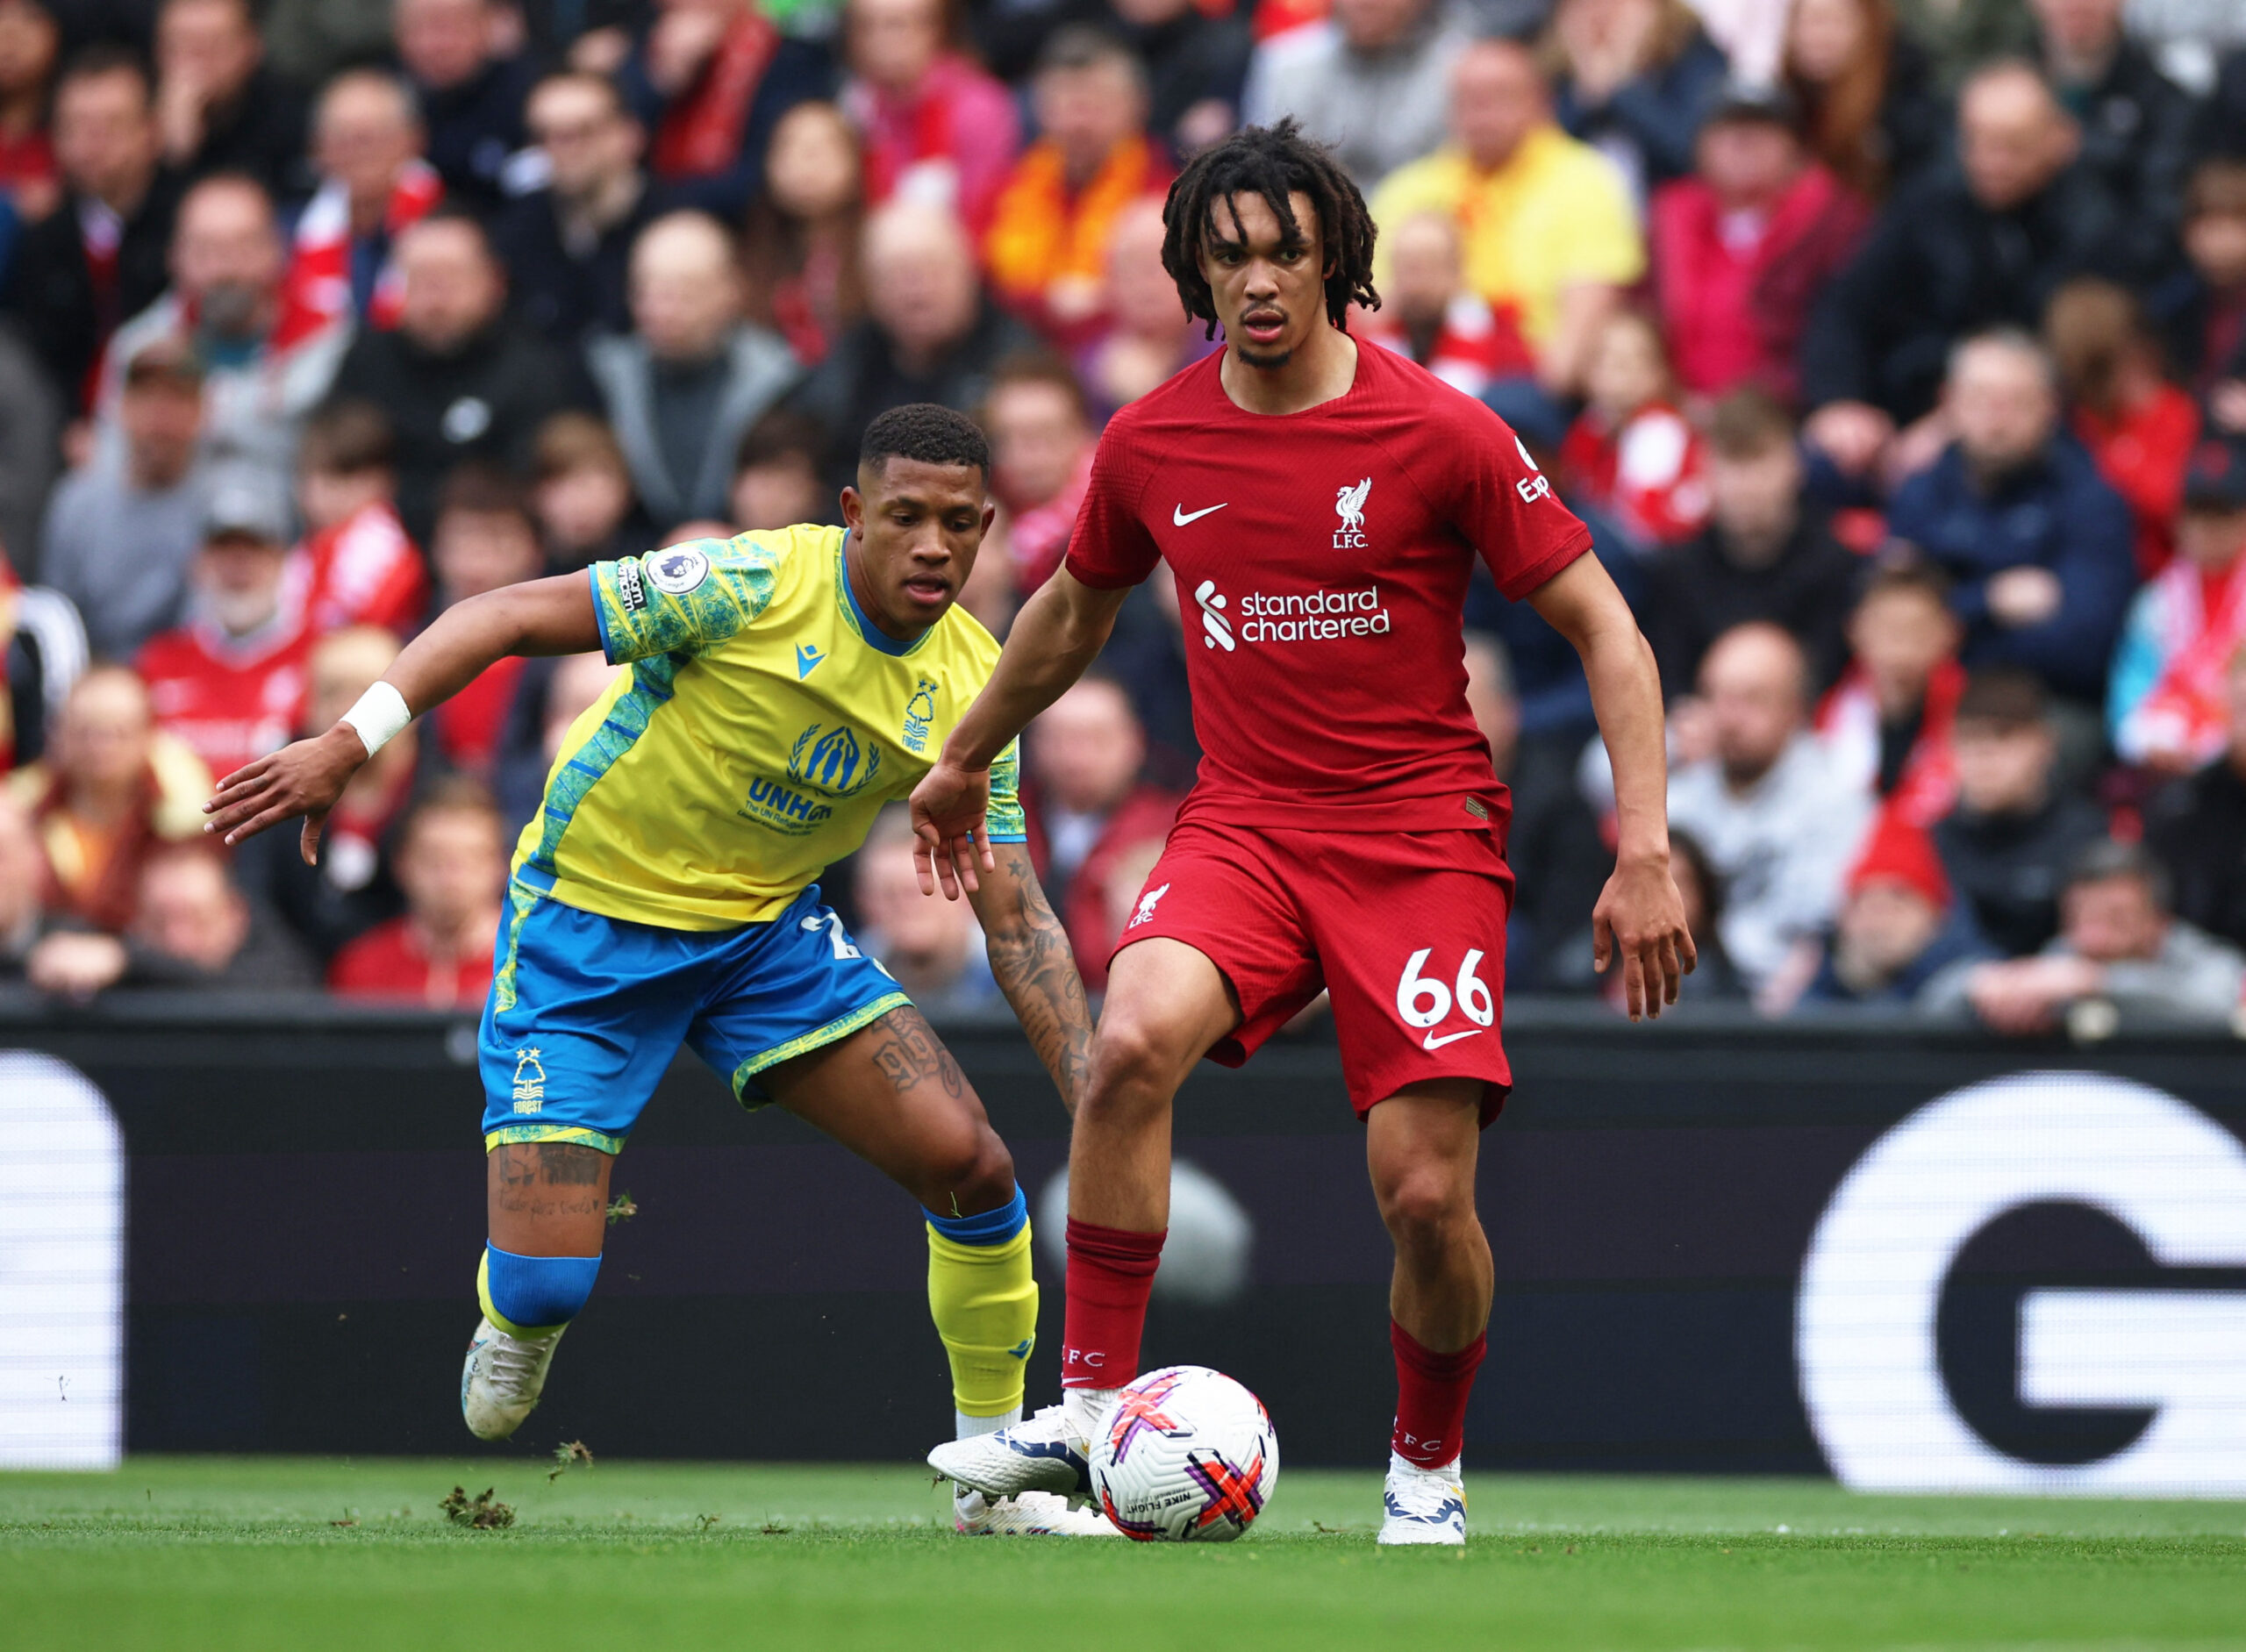 Alexander-Arnold masterclass proves hybrid players succeed